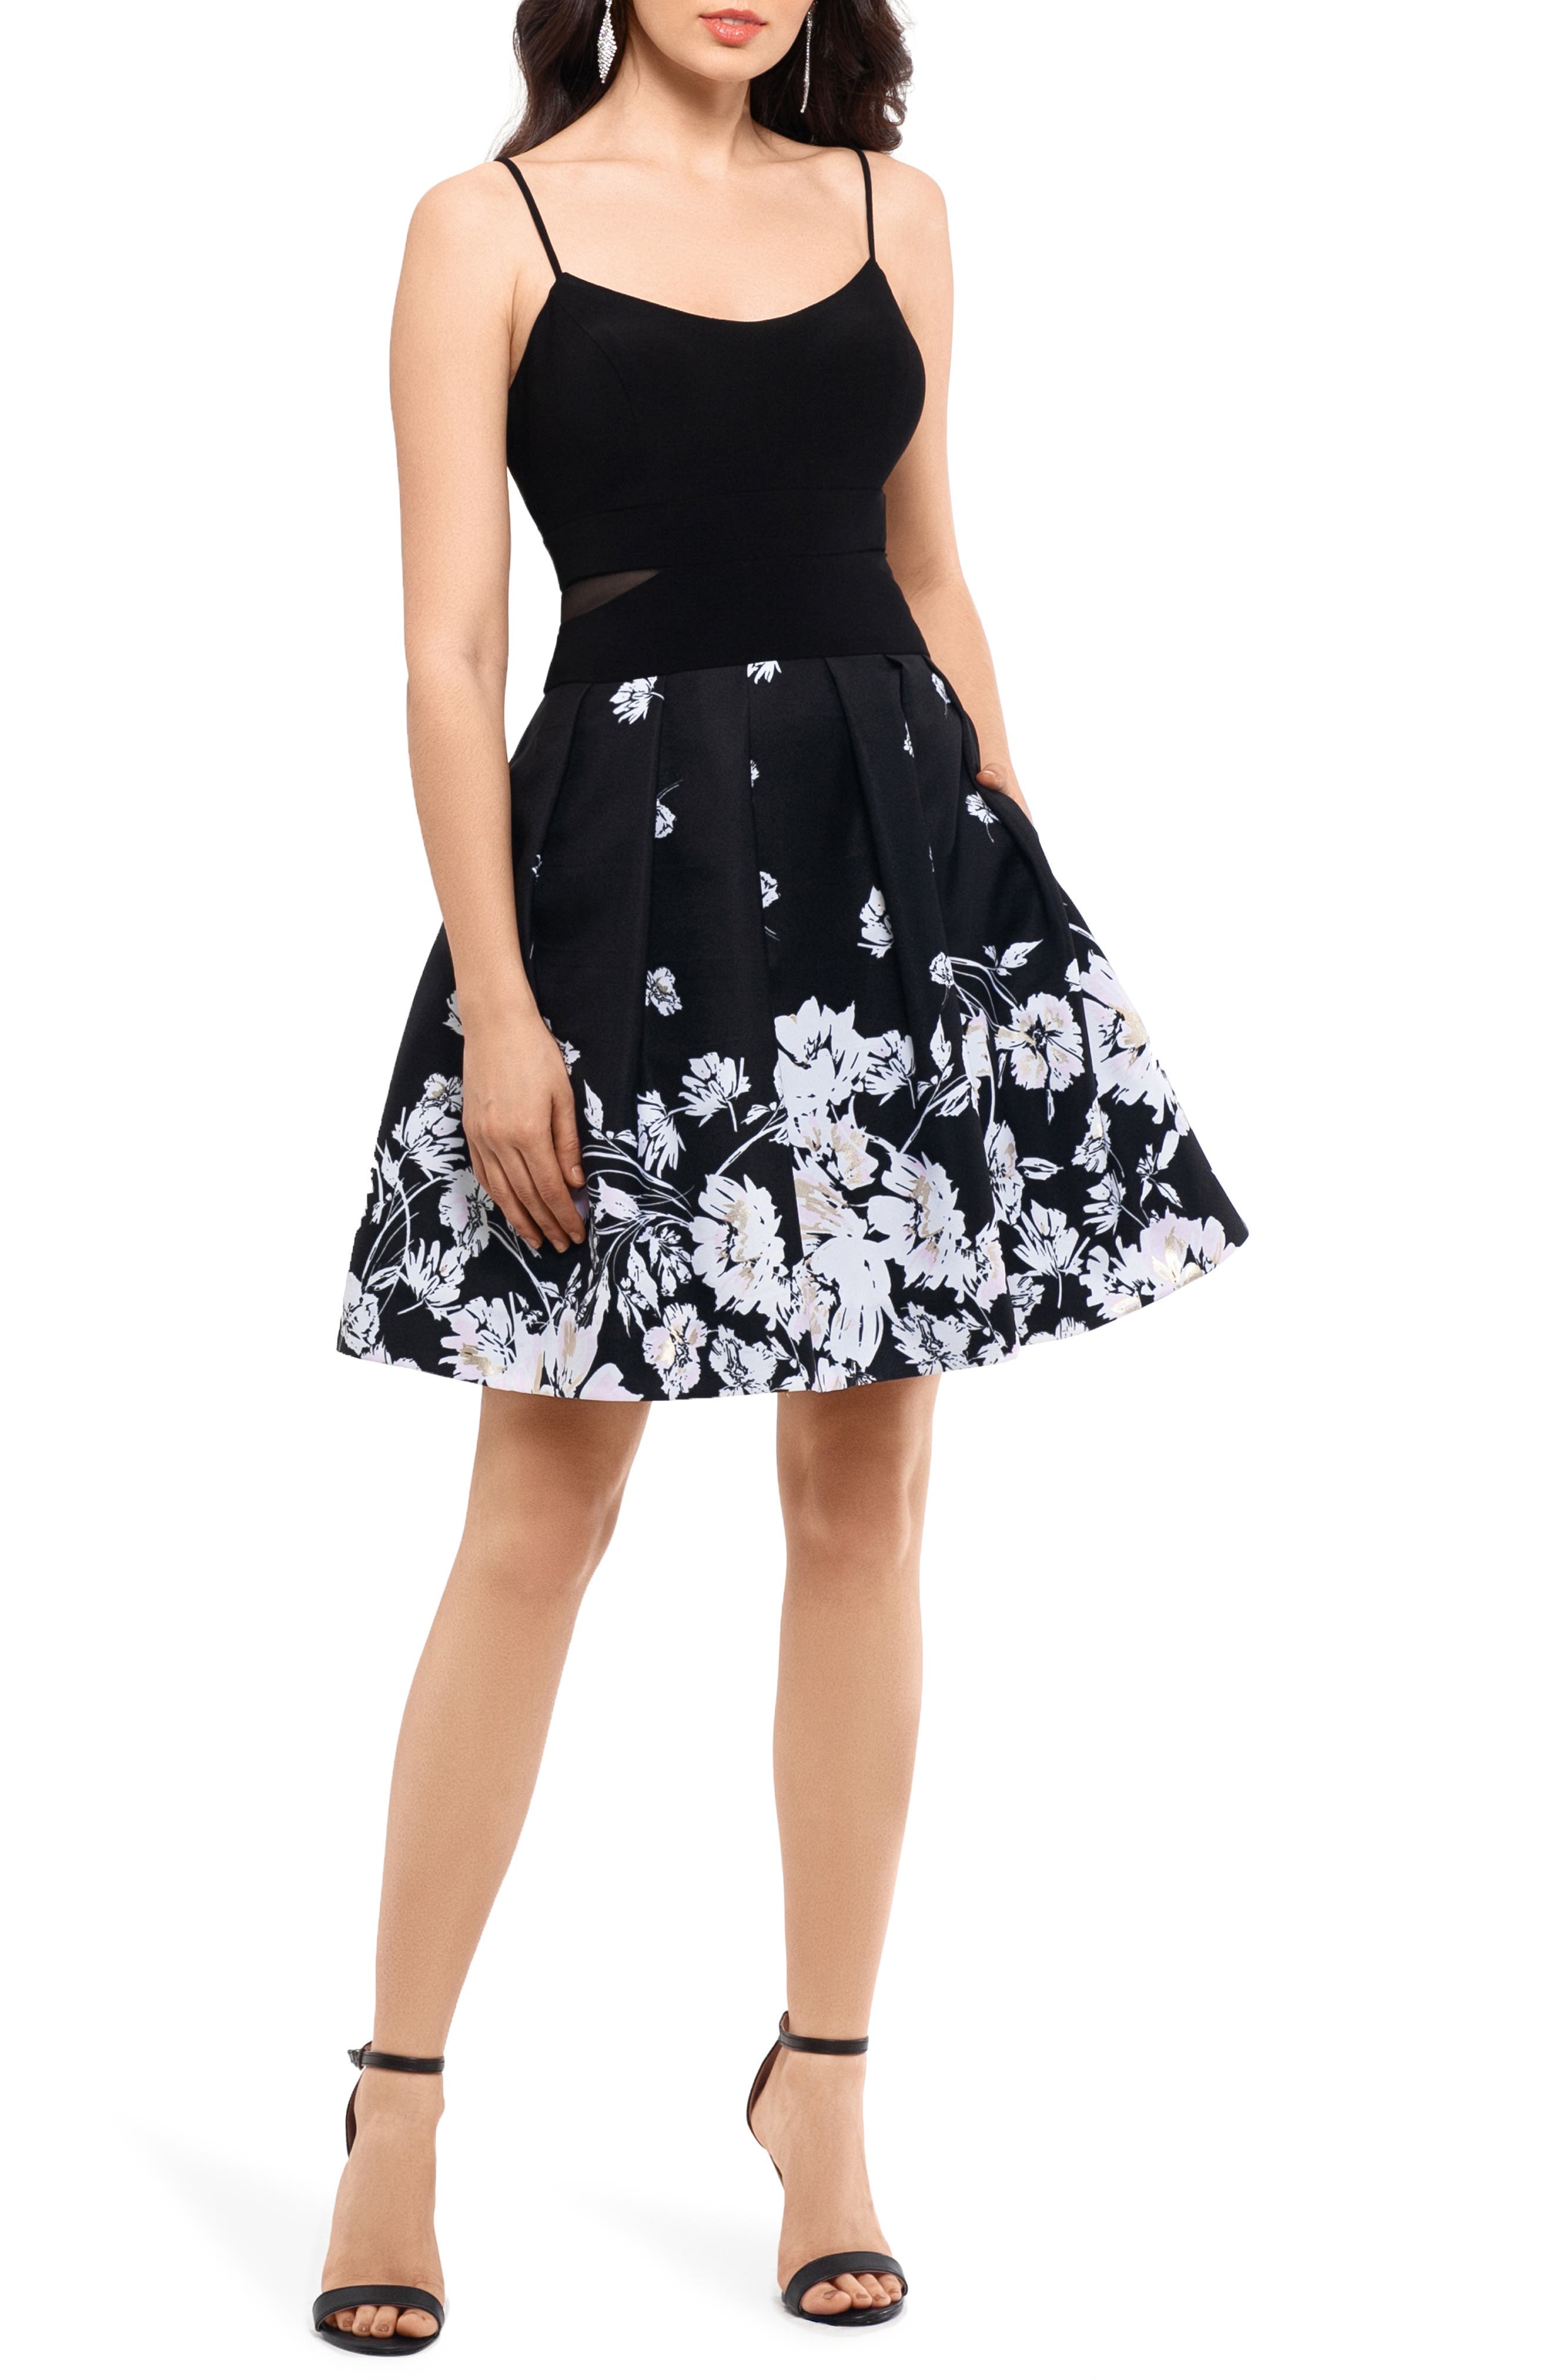 homecoming dresses 2019 nordstrom